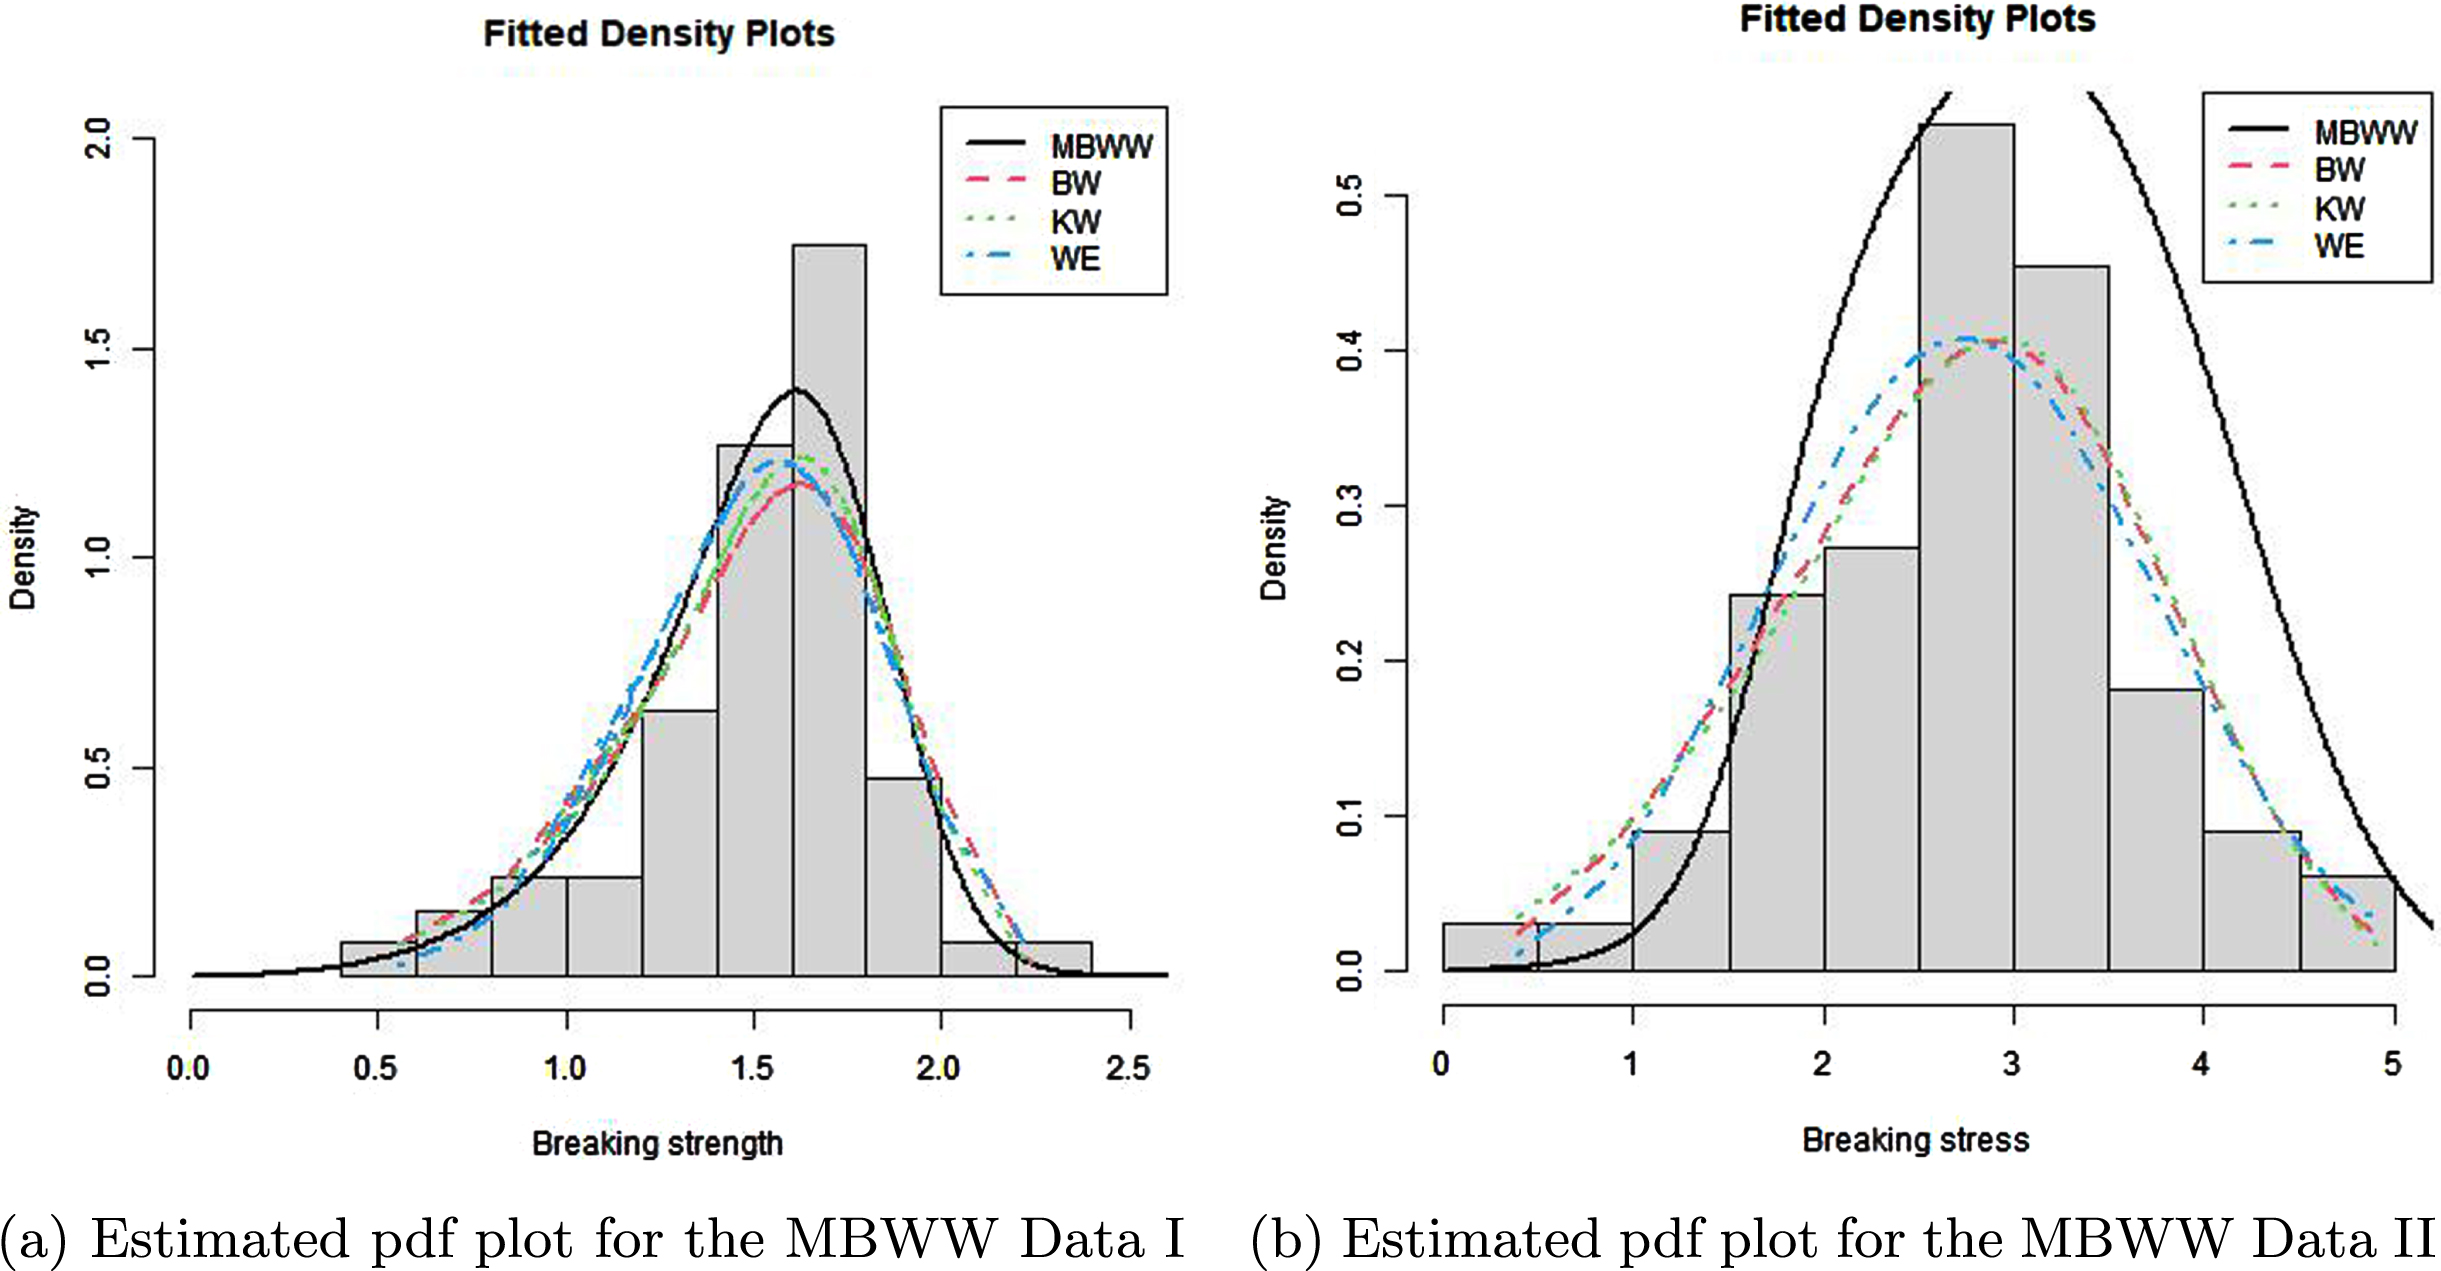 Estimated pdf plots for Data I and Data II.